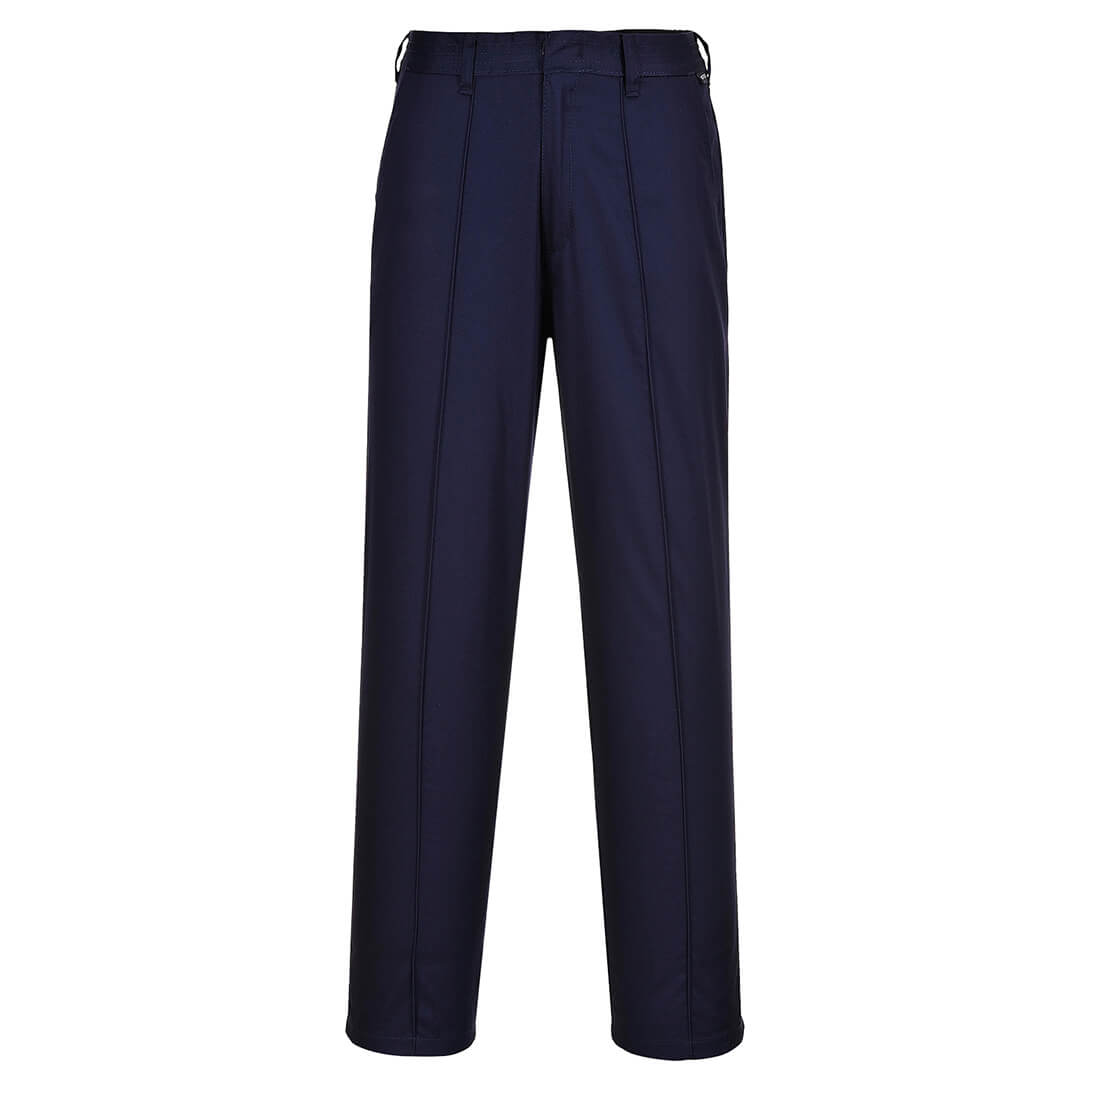 Image of Portwest LW97 ladies Elasticated Trousers Navy Blue 2XL 31"